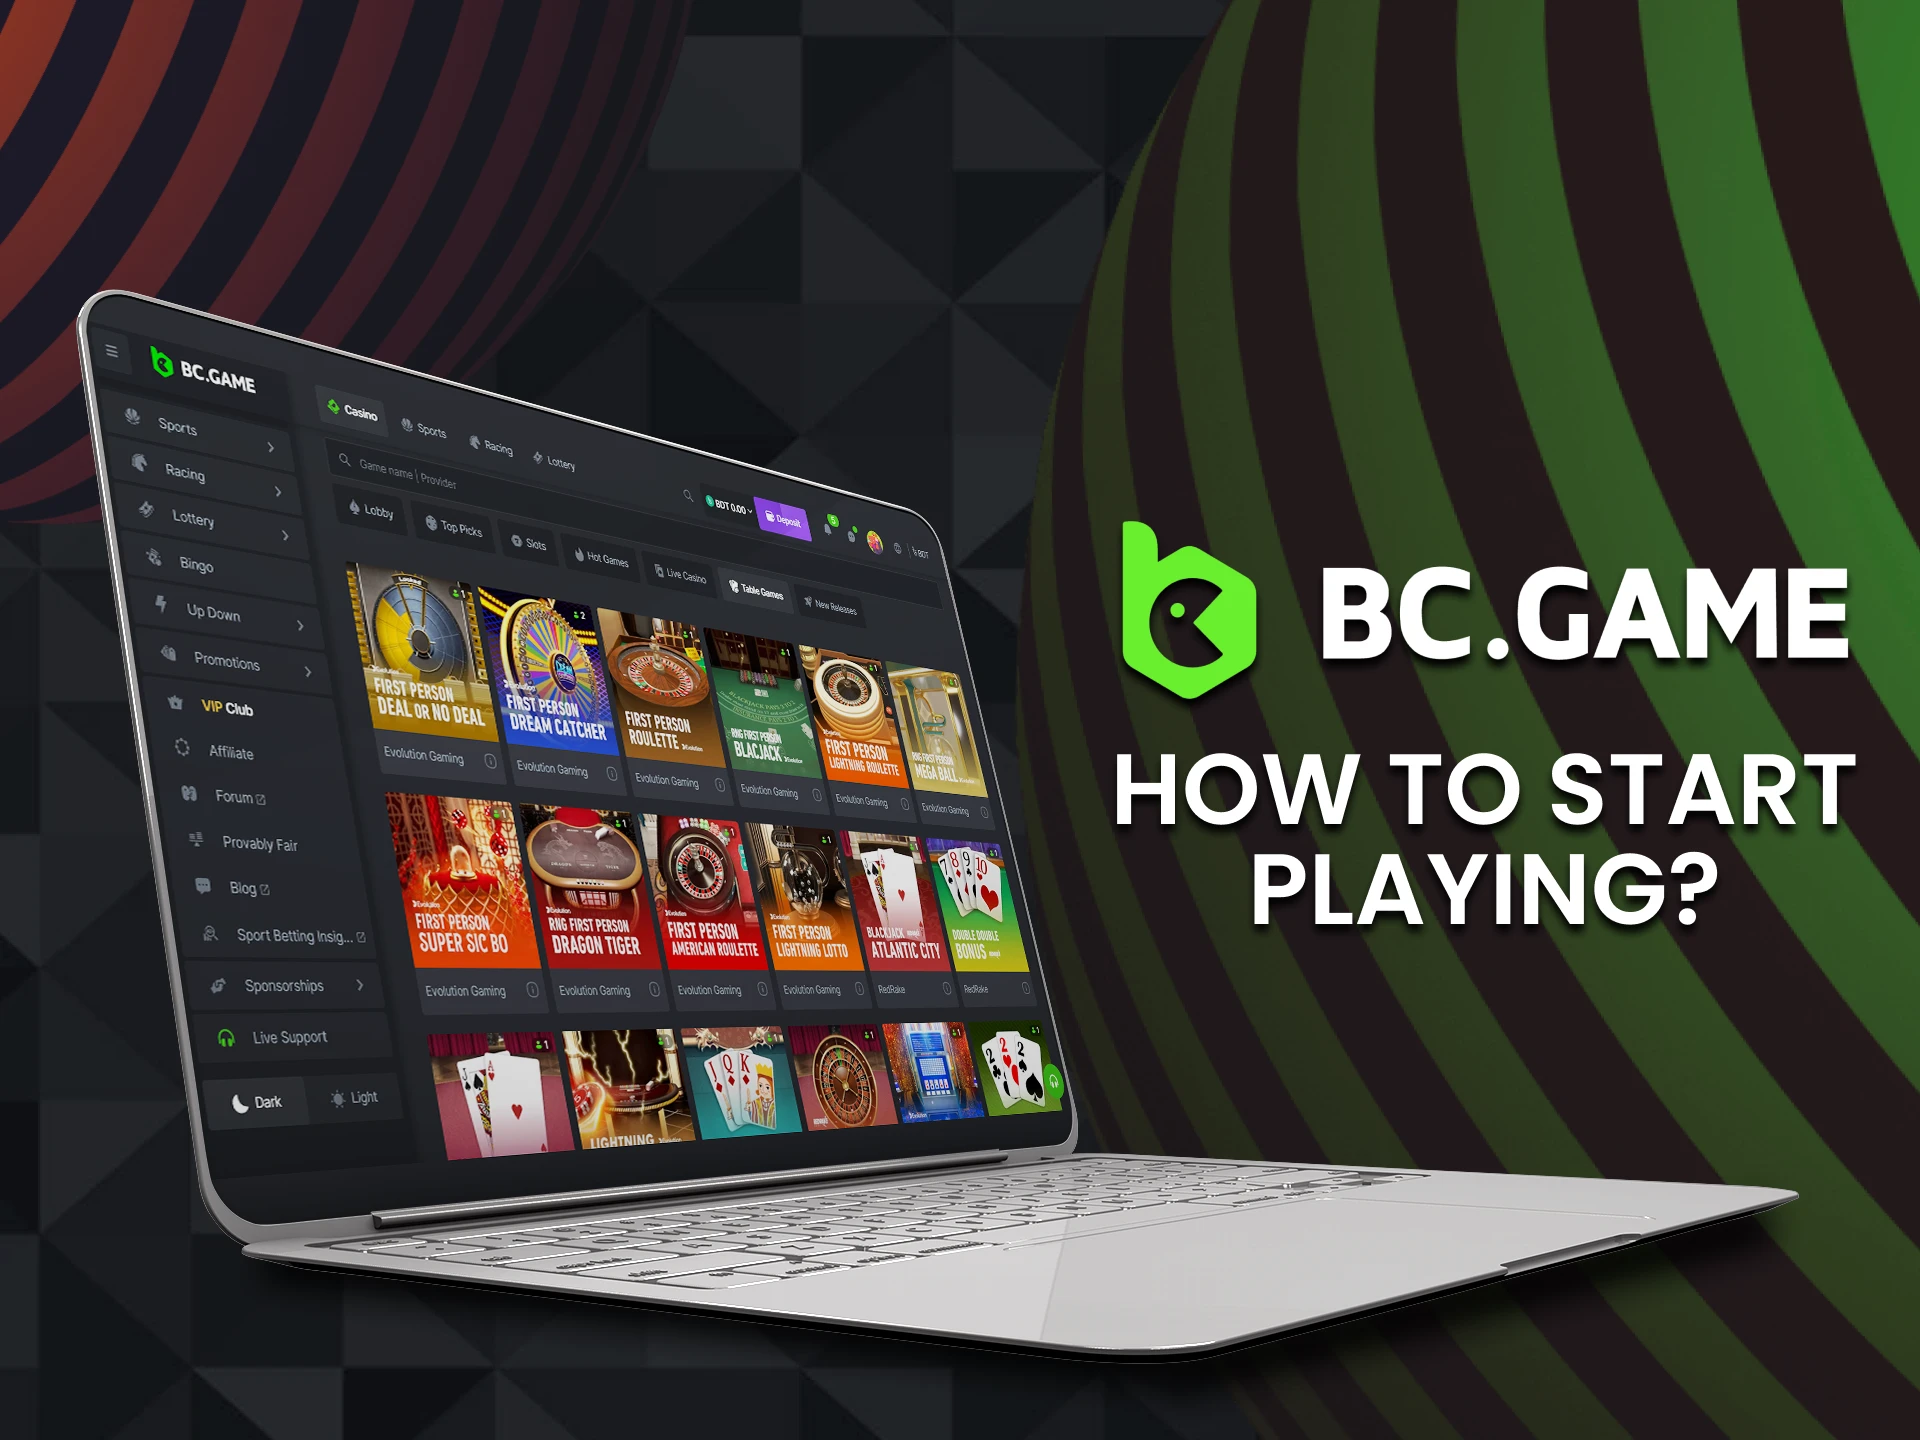 Make a deposit and go to the casino section to play roulette on BC Game.